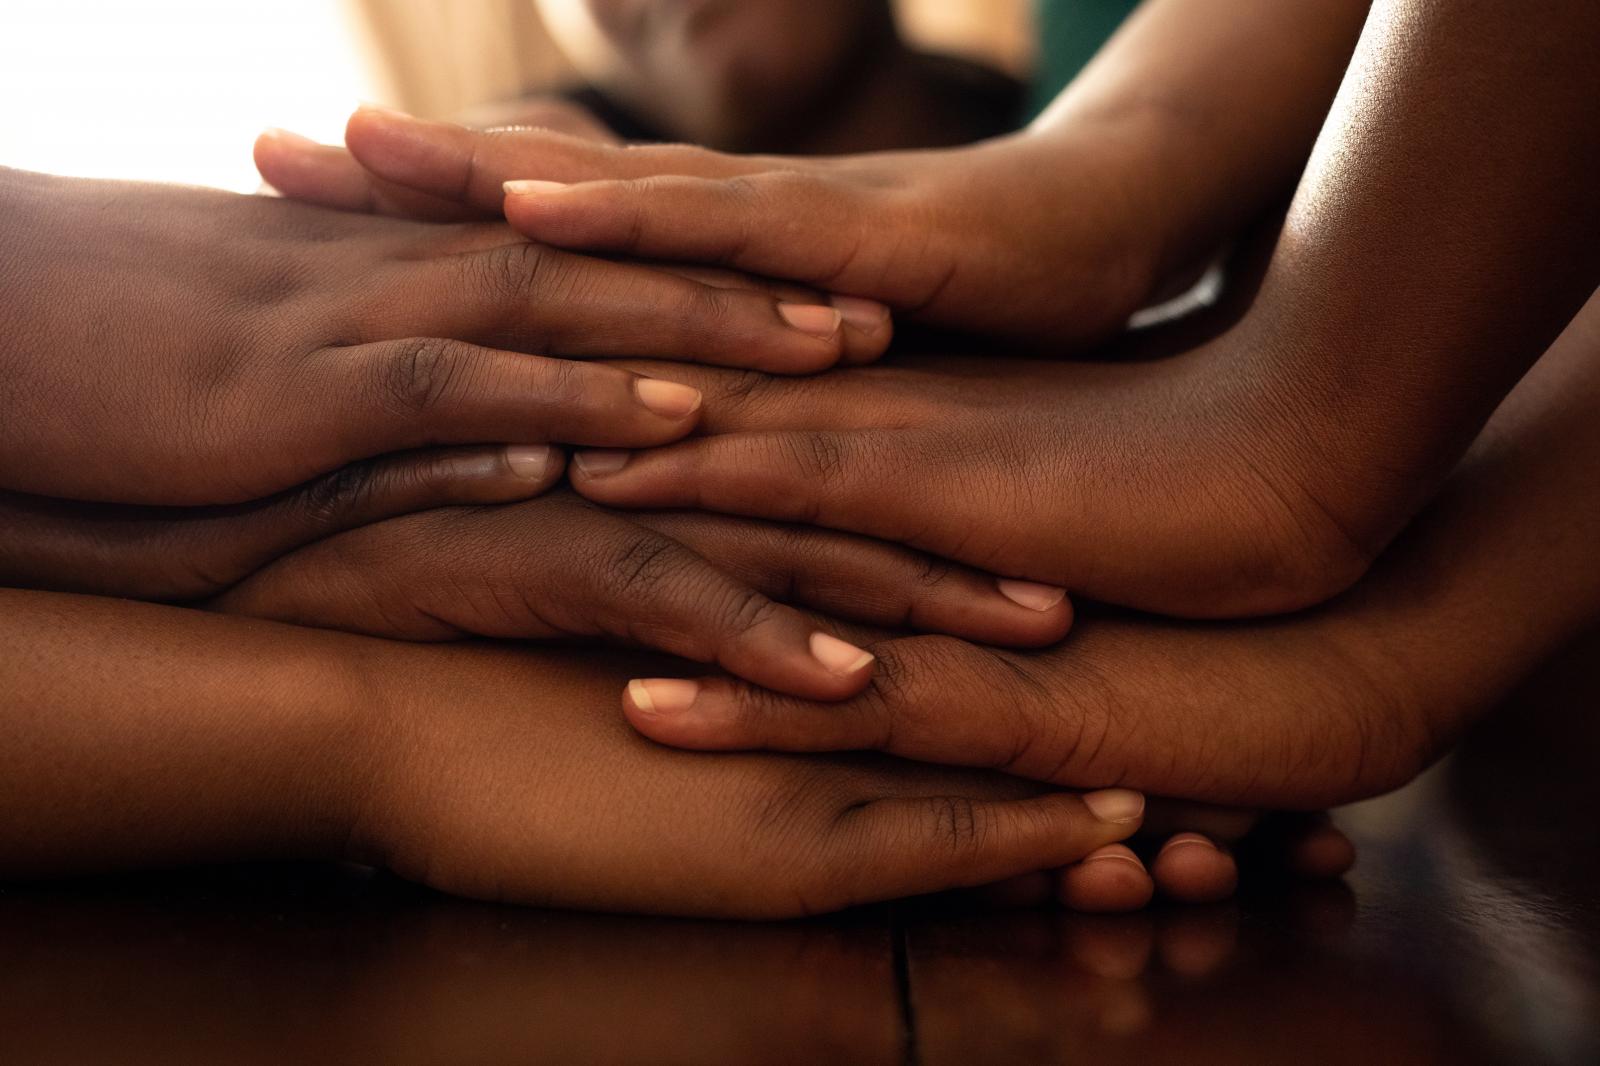 Image from Surviving Bery: A Girlhood Trauma | DeLovie Kwagala  - “Being here again, together in this shelter is like...